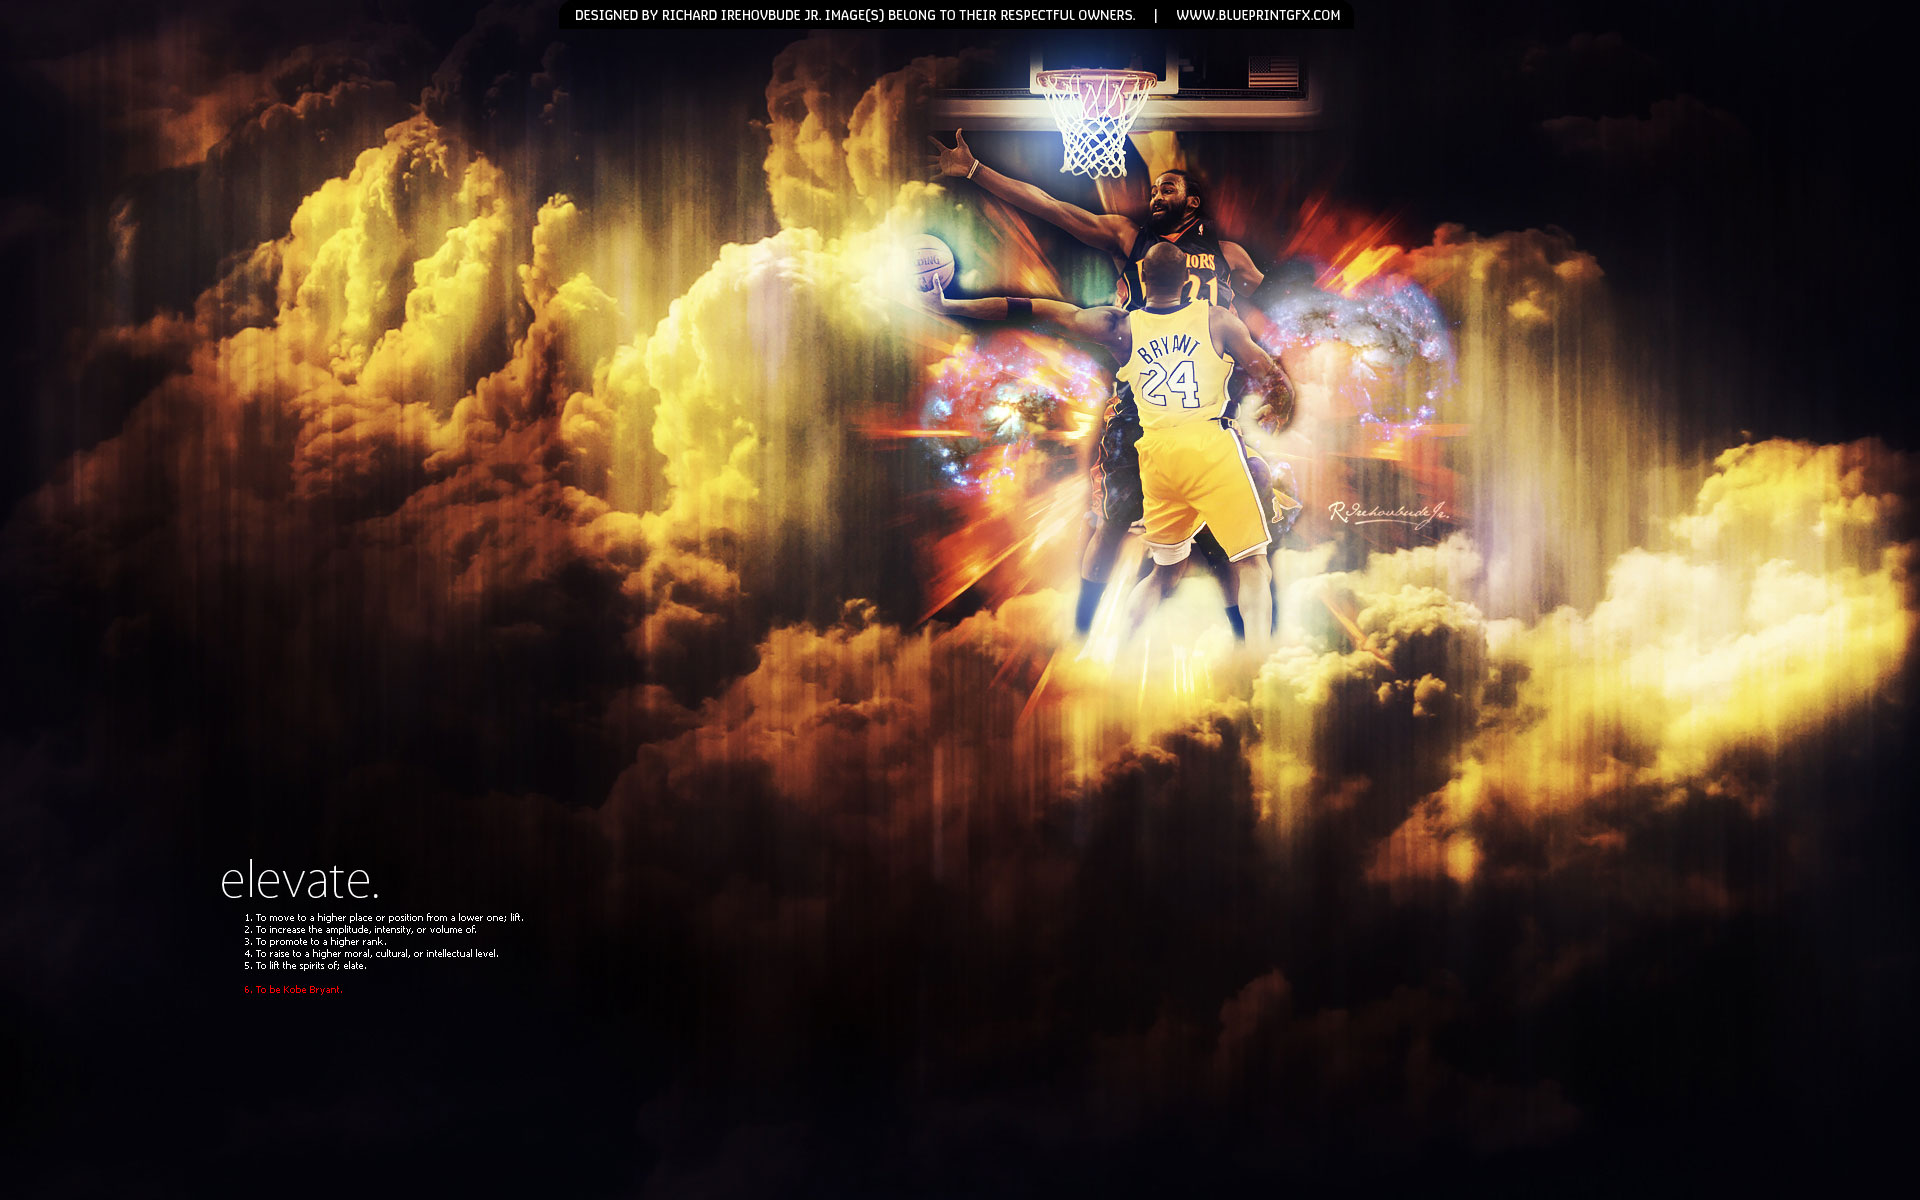 Next is widescreen wallpaper of Kobe Bryant scoring over Frenchman Ronny 